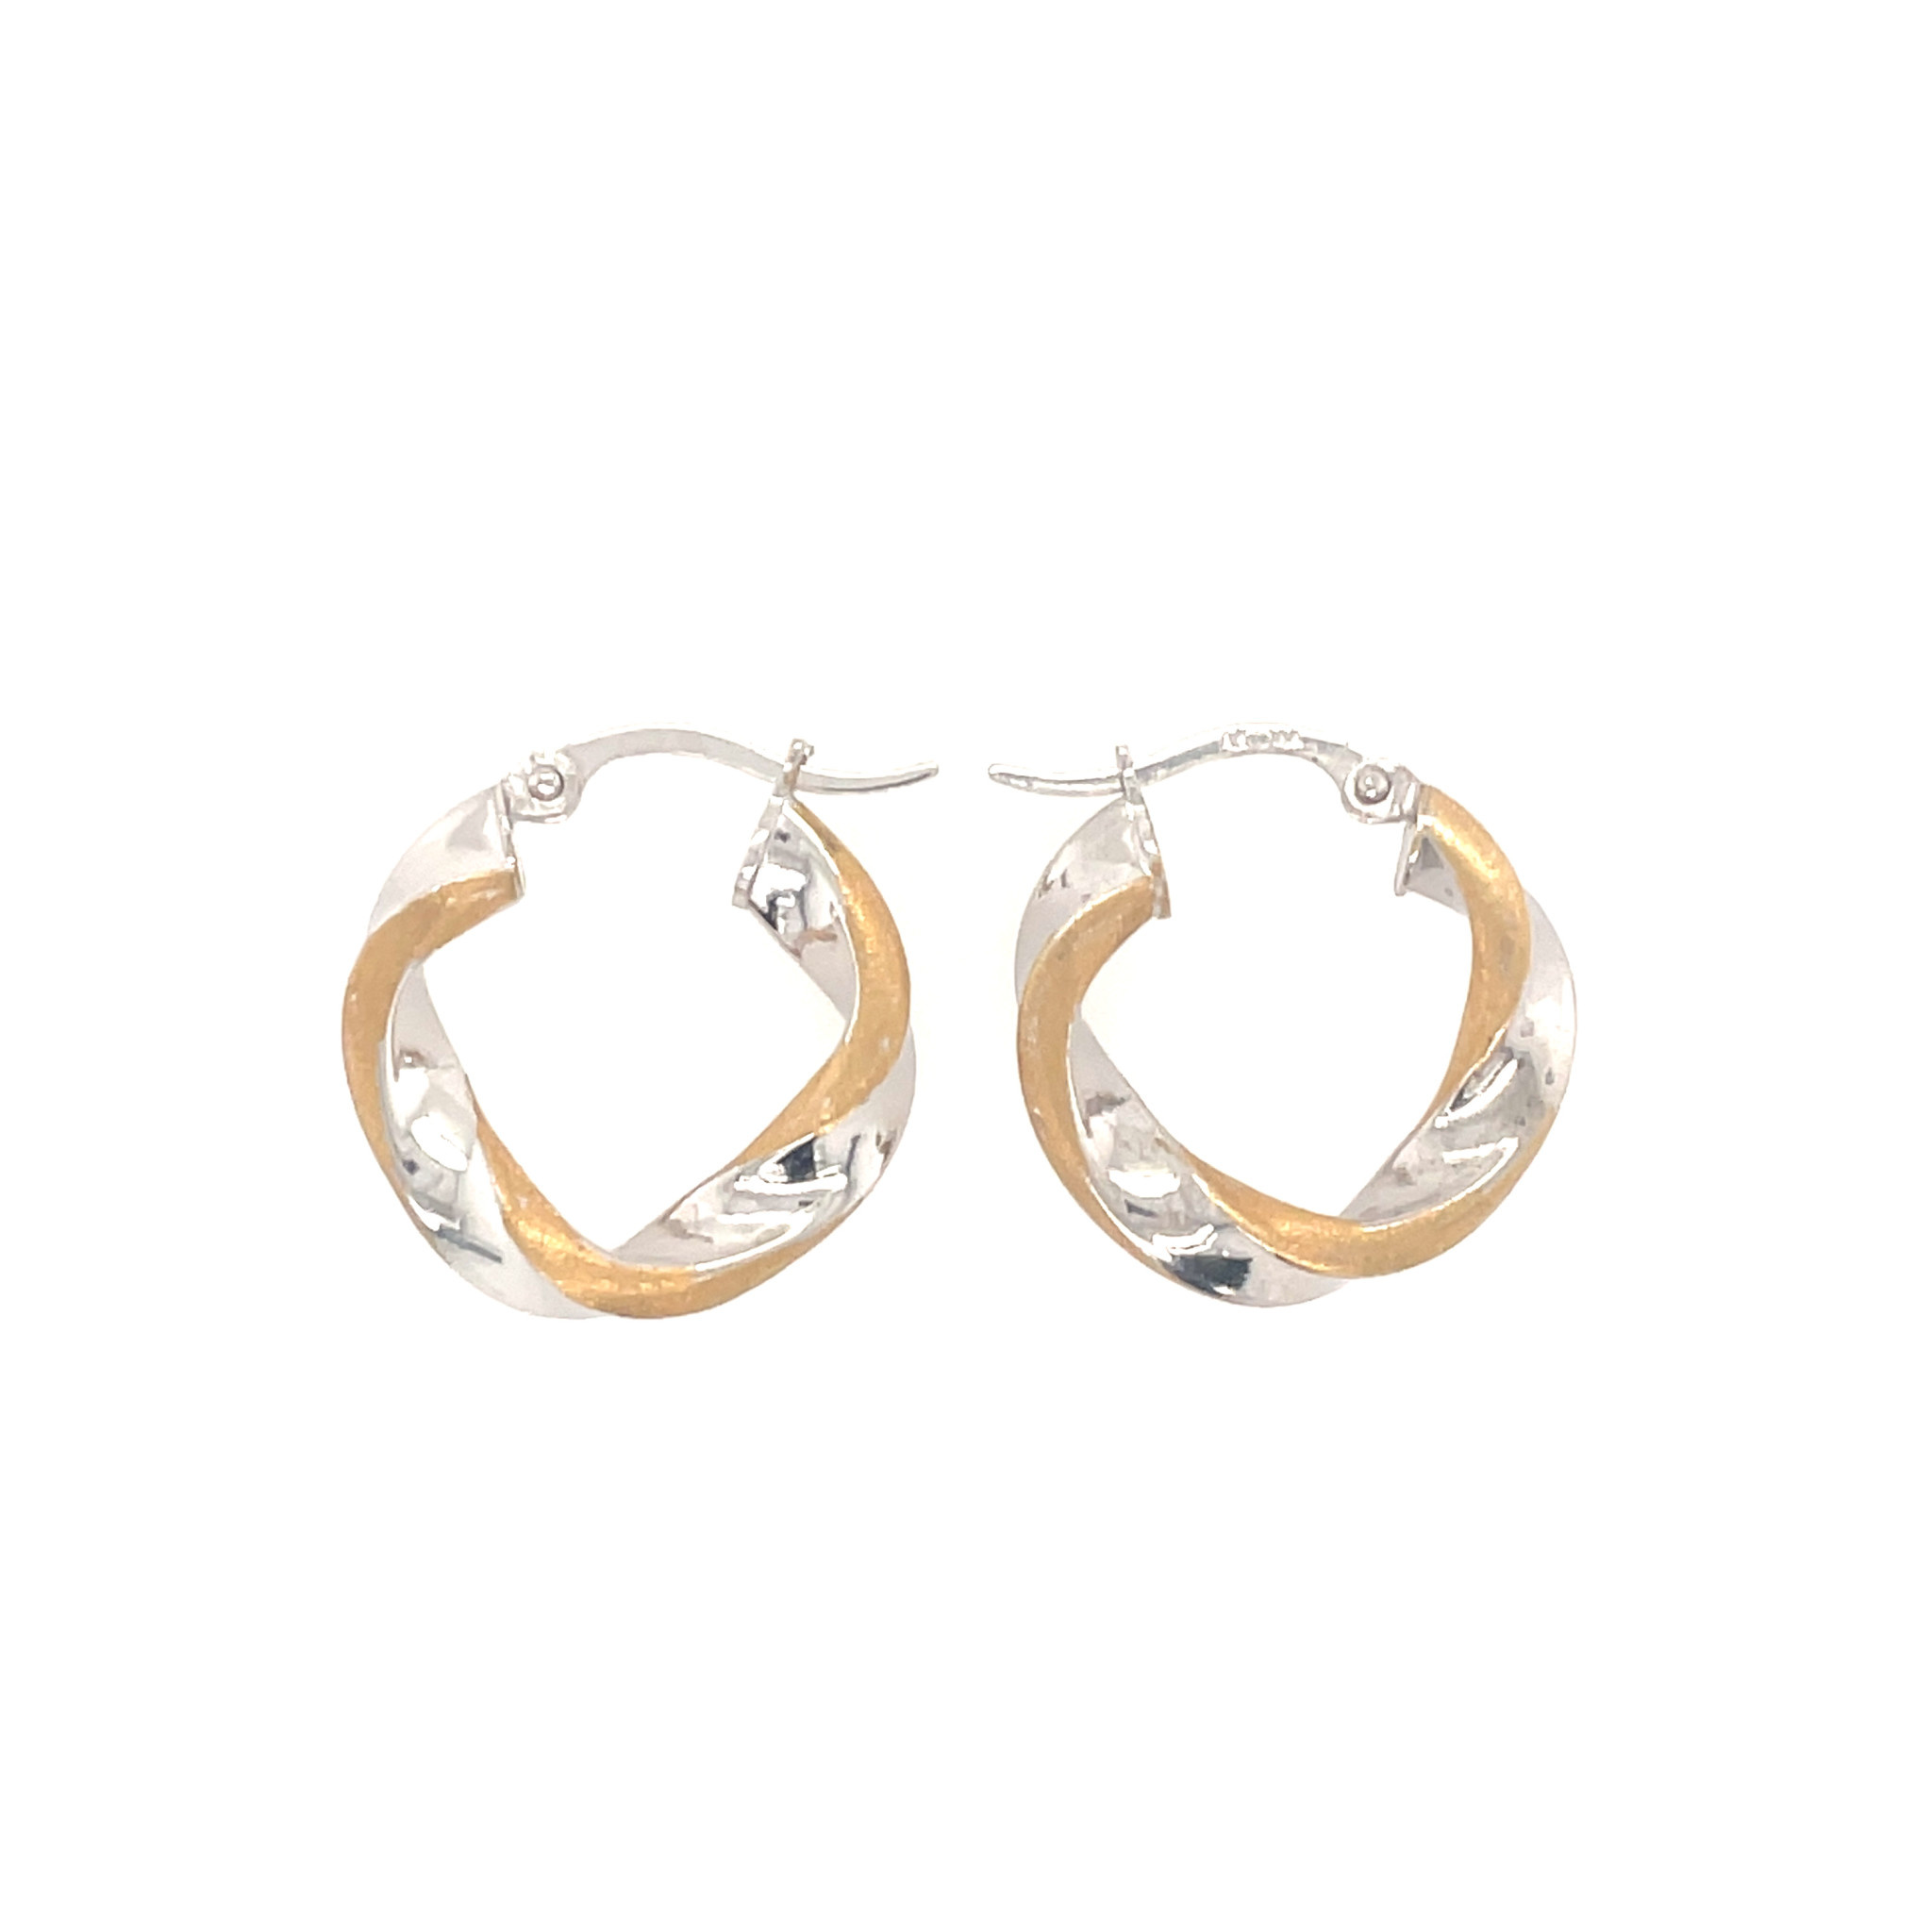 30172 14K  TWO-TONE (3/4"WIDE) TWISTED SATIN FINISH AND HIGH POLISH SMALL HOOPS